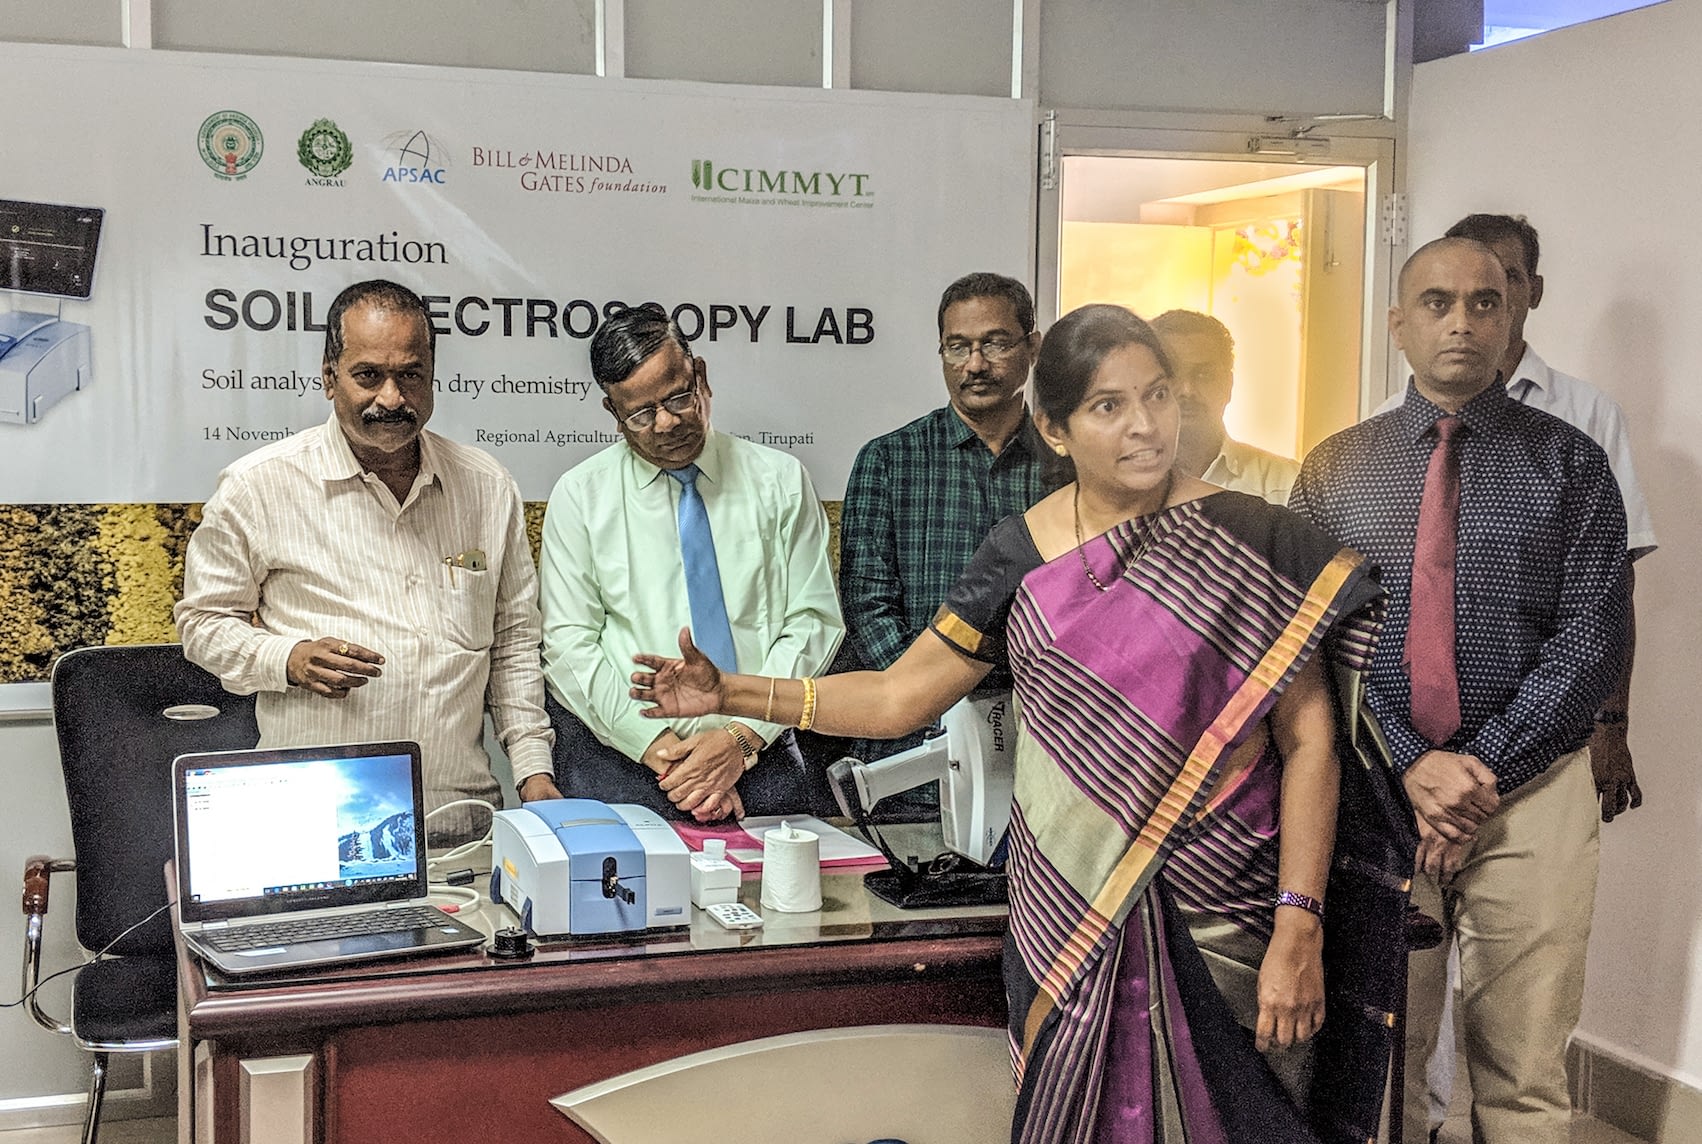 K.V. Naga Madhuri, Principal Scientist for Soil Science at Acharya N. G. Ranga Agricultural University (front), explains soil spectra during the opening of the soil spectroscopy lab at the Regional Agricultural Research Station in Tirupati, Andhra Pradesh.